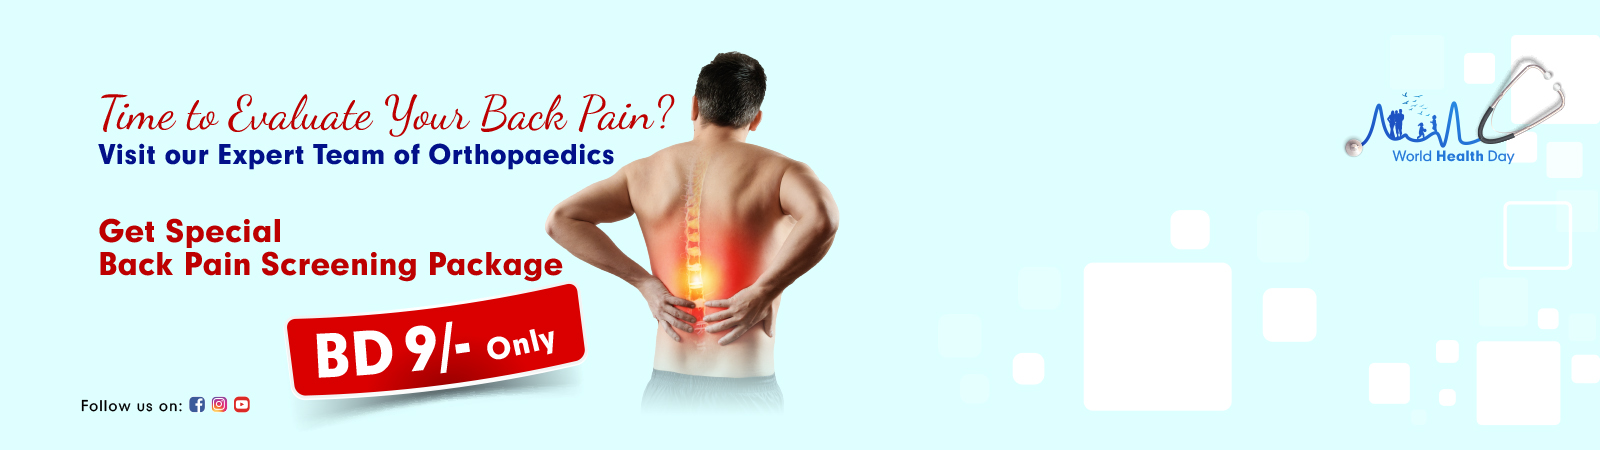 ALH-Website-Banner-Back-Pain-Package-1600-x-450